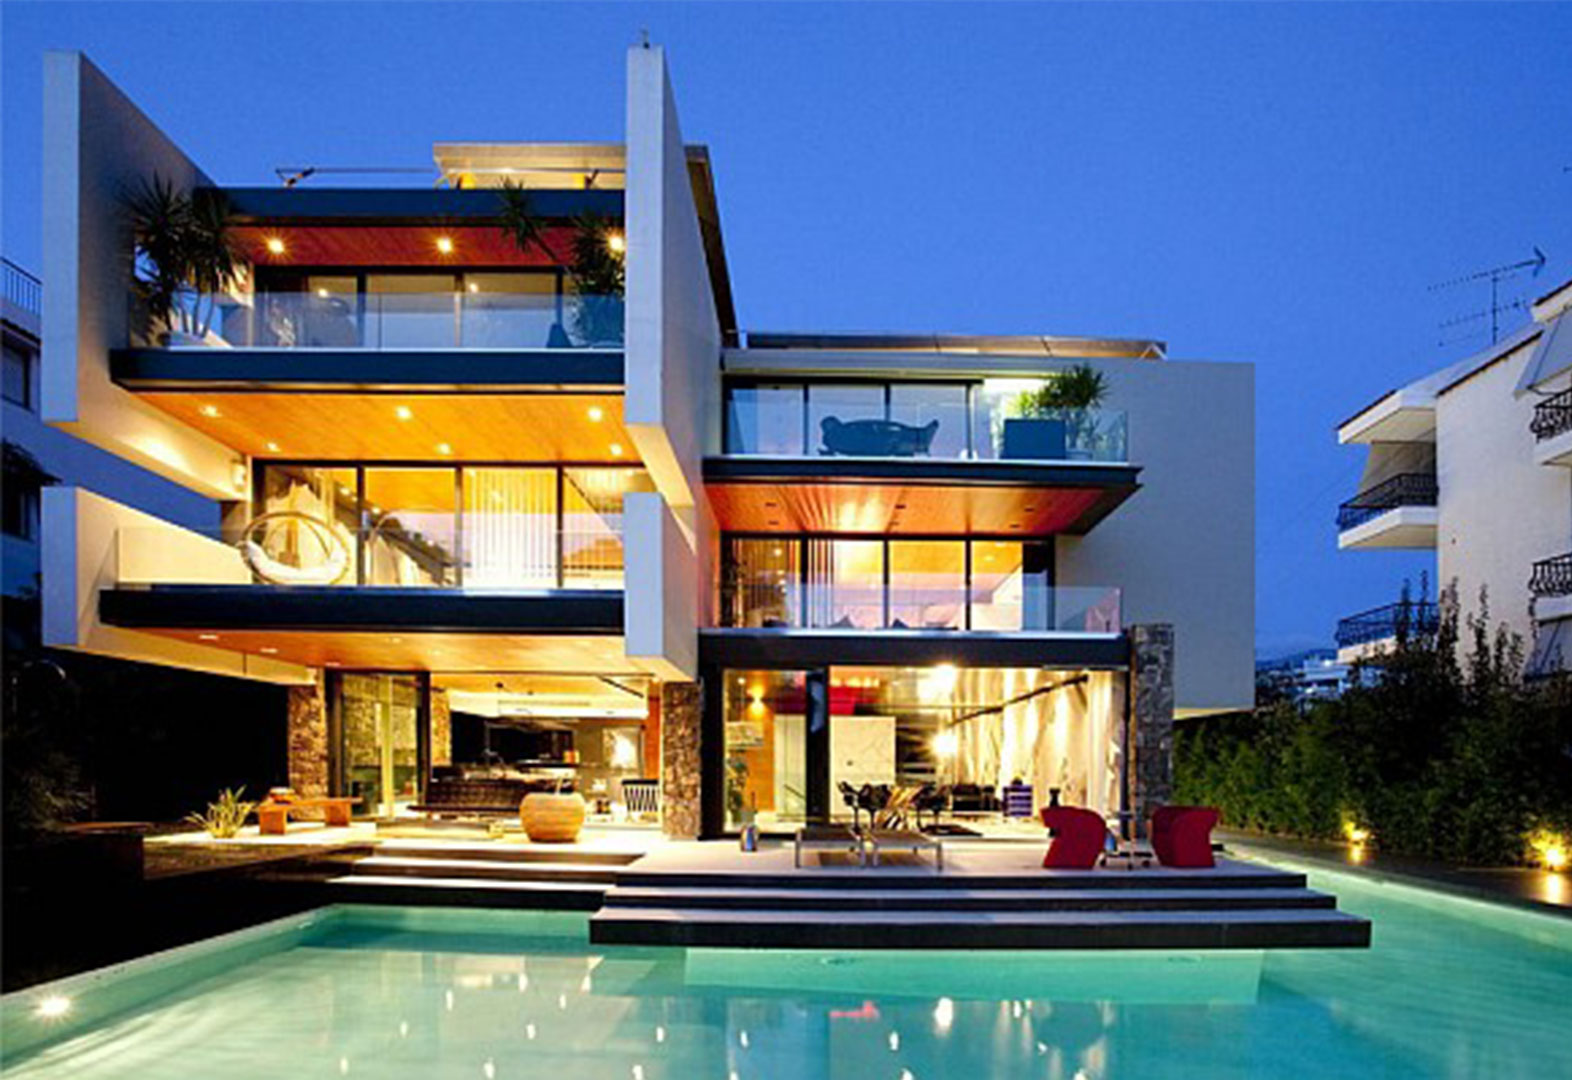 35 Modern Villa Design That Will Amaze You – The WoW Style